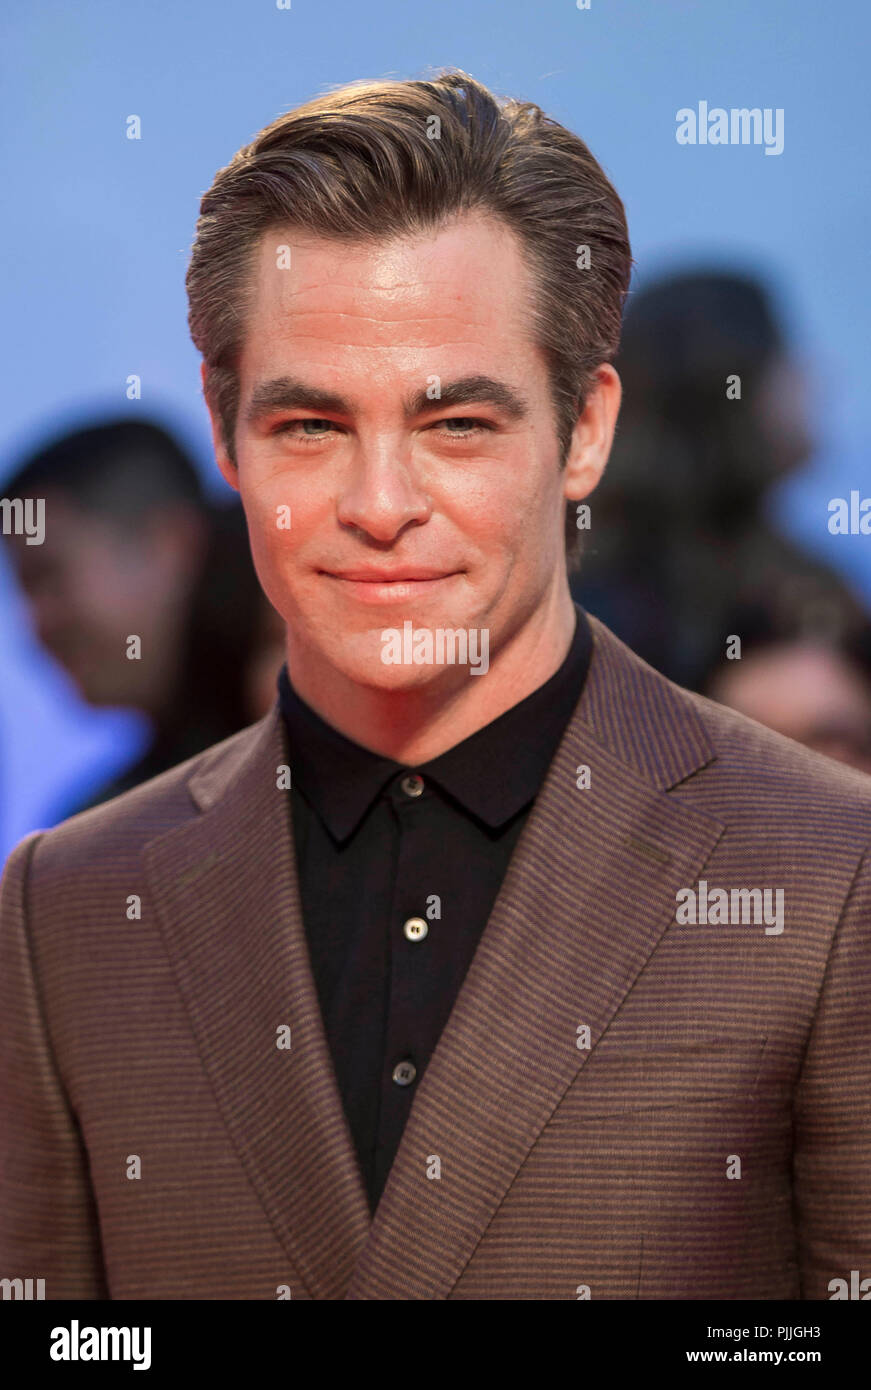 Toronto, Canada. 6th Sep, 2018. Actor Chris Pine poses for photos before  the world premiere of the opening film "Outlaw King" at Roy Thomson Hall  during the 2018 Toronto International Film Festival (